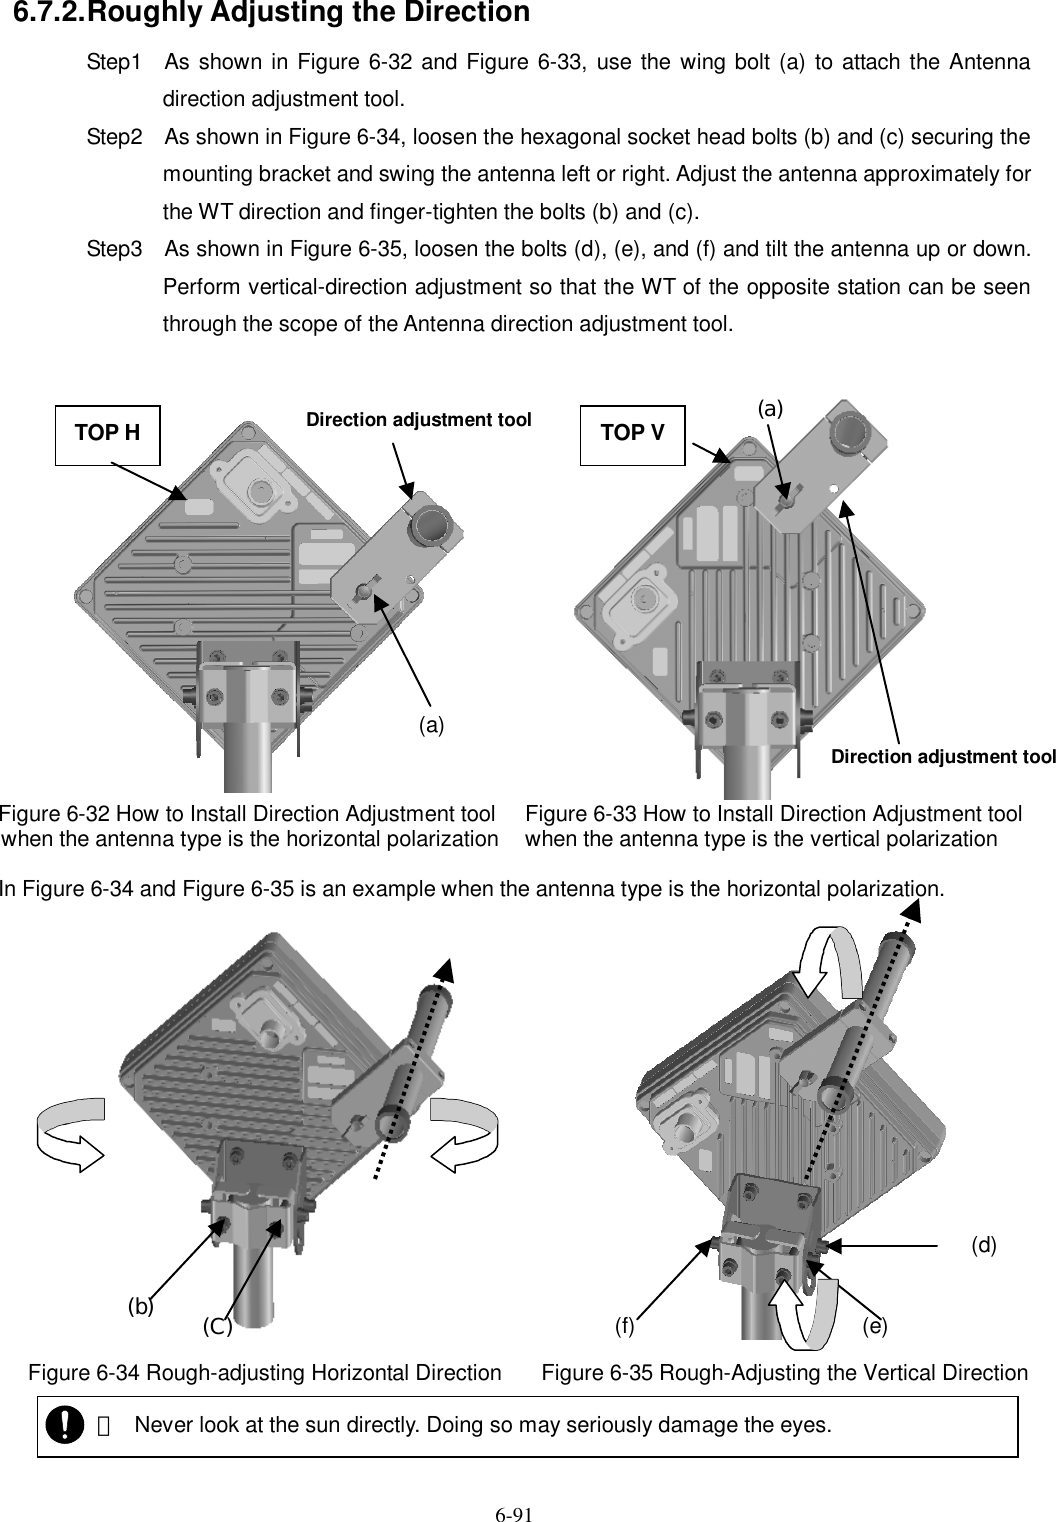   6-91 (f)  (e) (d) (b)  (C) 6.7.2. Roughly Adjusting the Direction Step1    As shown in Figure 6-32 and Figure 6-33,  use the wing bolt (a) to attach the Antenna direction adjustment tool. Step2    As shown in Figure 6-34, loosen the hexagonal socket head bolts (b) and (c) securing the mounting bracket and swing the antenna left or right. Adjust the antenna approximately for the WT direction and finger-tighten the bolts (b) and (c). Step3    As shown in Figure 6-35, loosen the bolts (d), (e), and (f) and tilt the antenna up or down. Perform vertical-direction adjustment so that the WT of the opposite station can be seen through the scope of the Antenna direction adjustment tool.                  Figure 6-32 How to Install Direction Adjustment tool  when the antenna type is the horizontal polarization Figure 6-33 How to Install Direction Adjustment tool  when the antenna type is the vertical polarization  In Figure 6-34 and Figure 6-35 is an example when the antenna type is the horizontal polarization.                      Figure 6-34 Rough-adjusting Horizontal Direction  Figure 6-35 Rough-Adjusting the Vertical Direction   ・ Never look at the sun directly. Doing so may seriously damage the eyes. Direction adjustment tool  TOP V  (a) TOP H Direction adjustment tool  (a) 